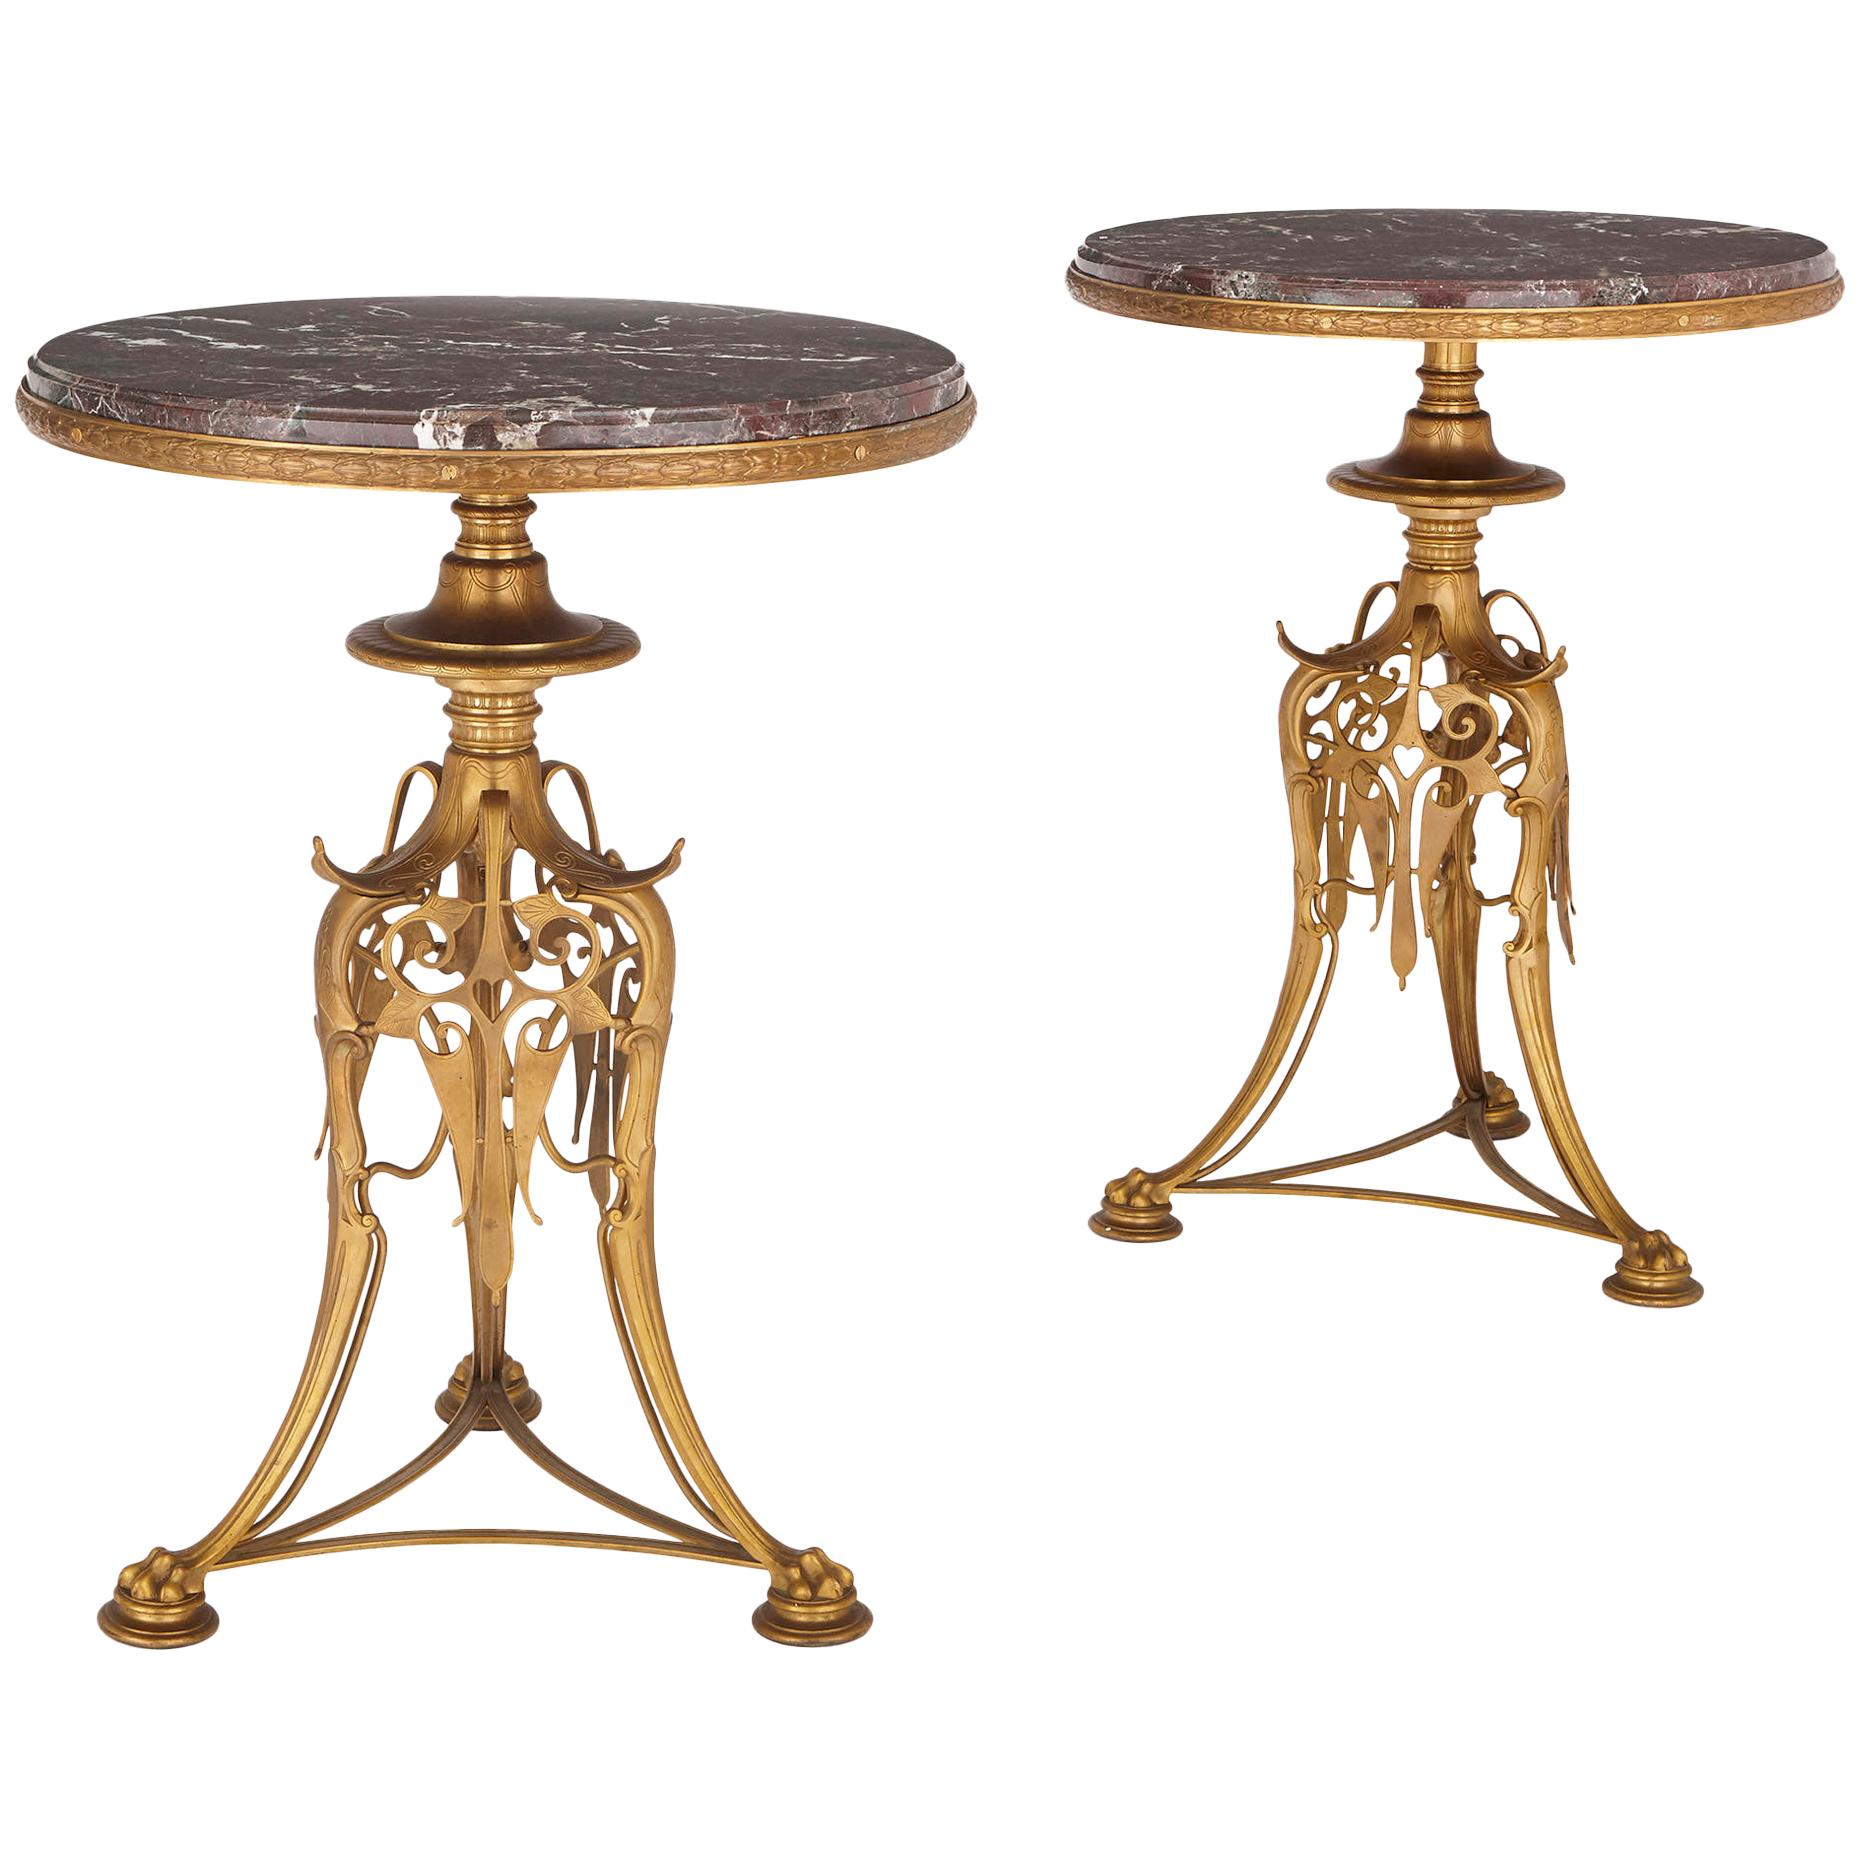 Two 19th Century Gilt Bronze and Marble Round Tables by Barbedienne